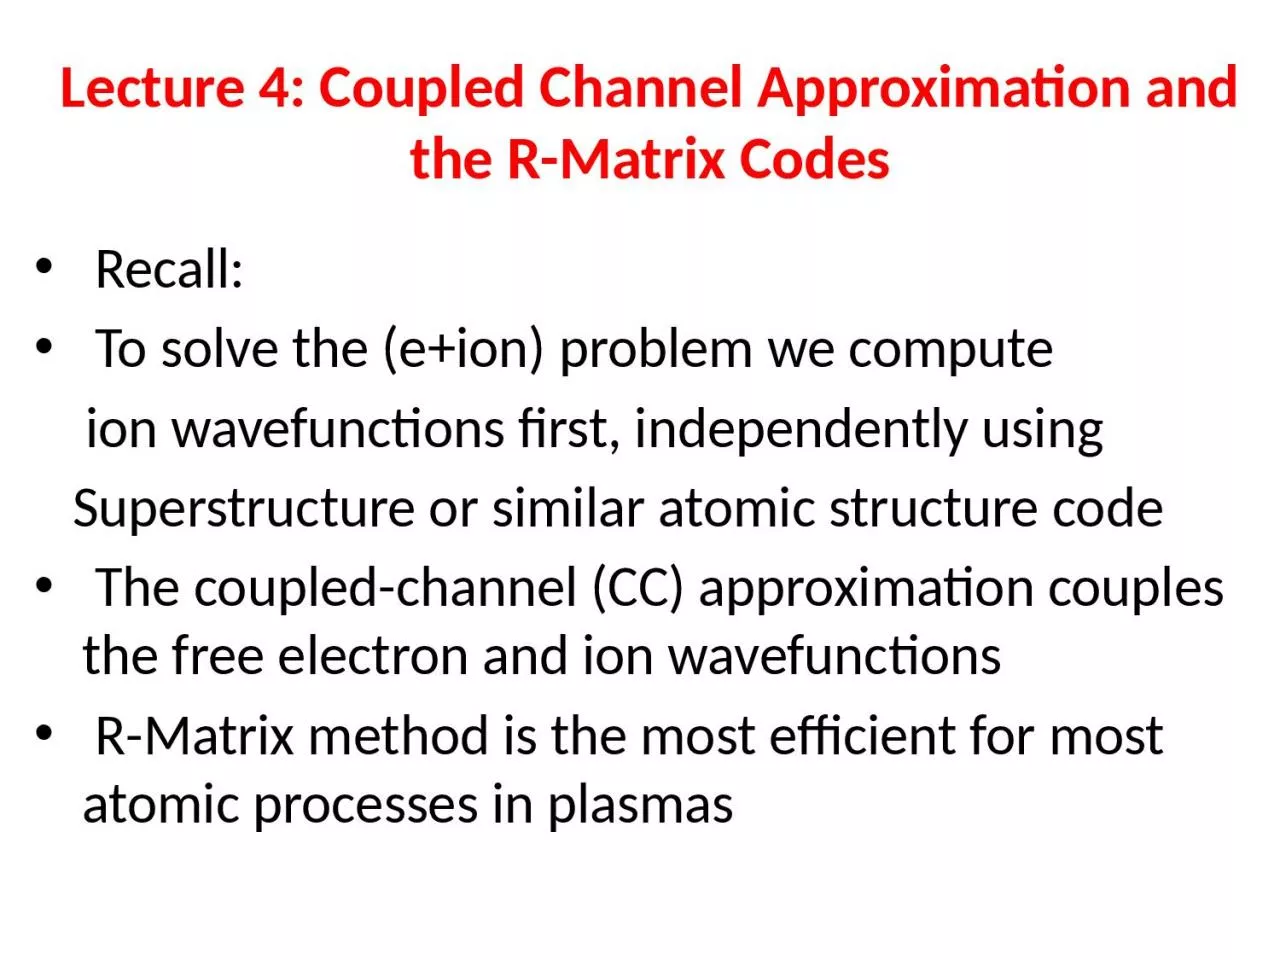 Lecture 4: Coupled Channel Approximation and the R-Matrix Codes